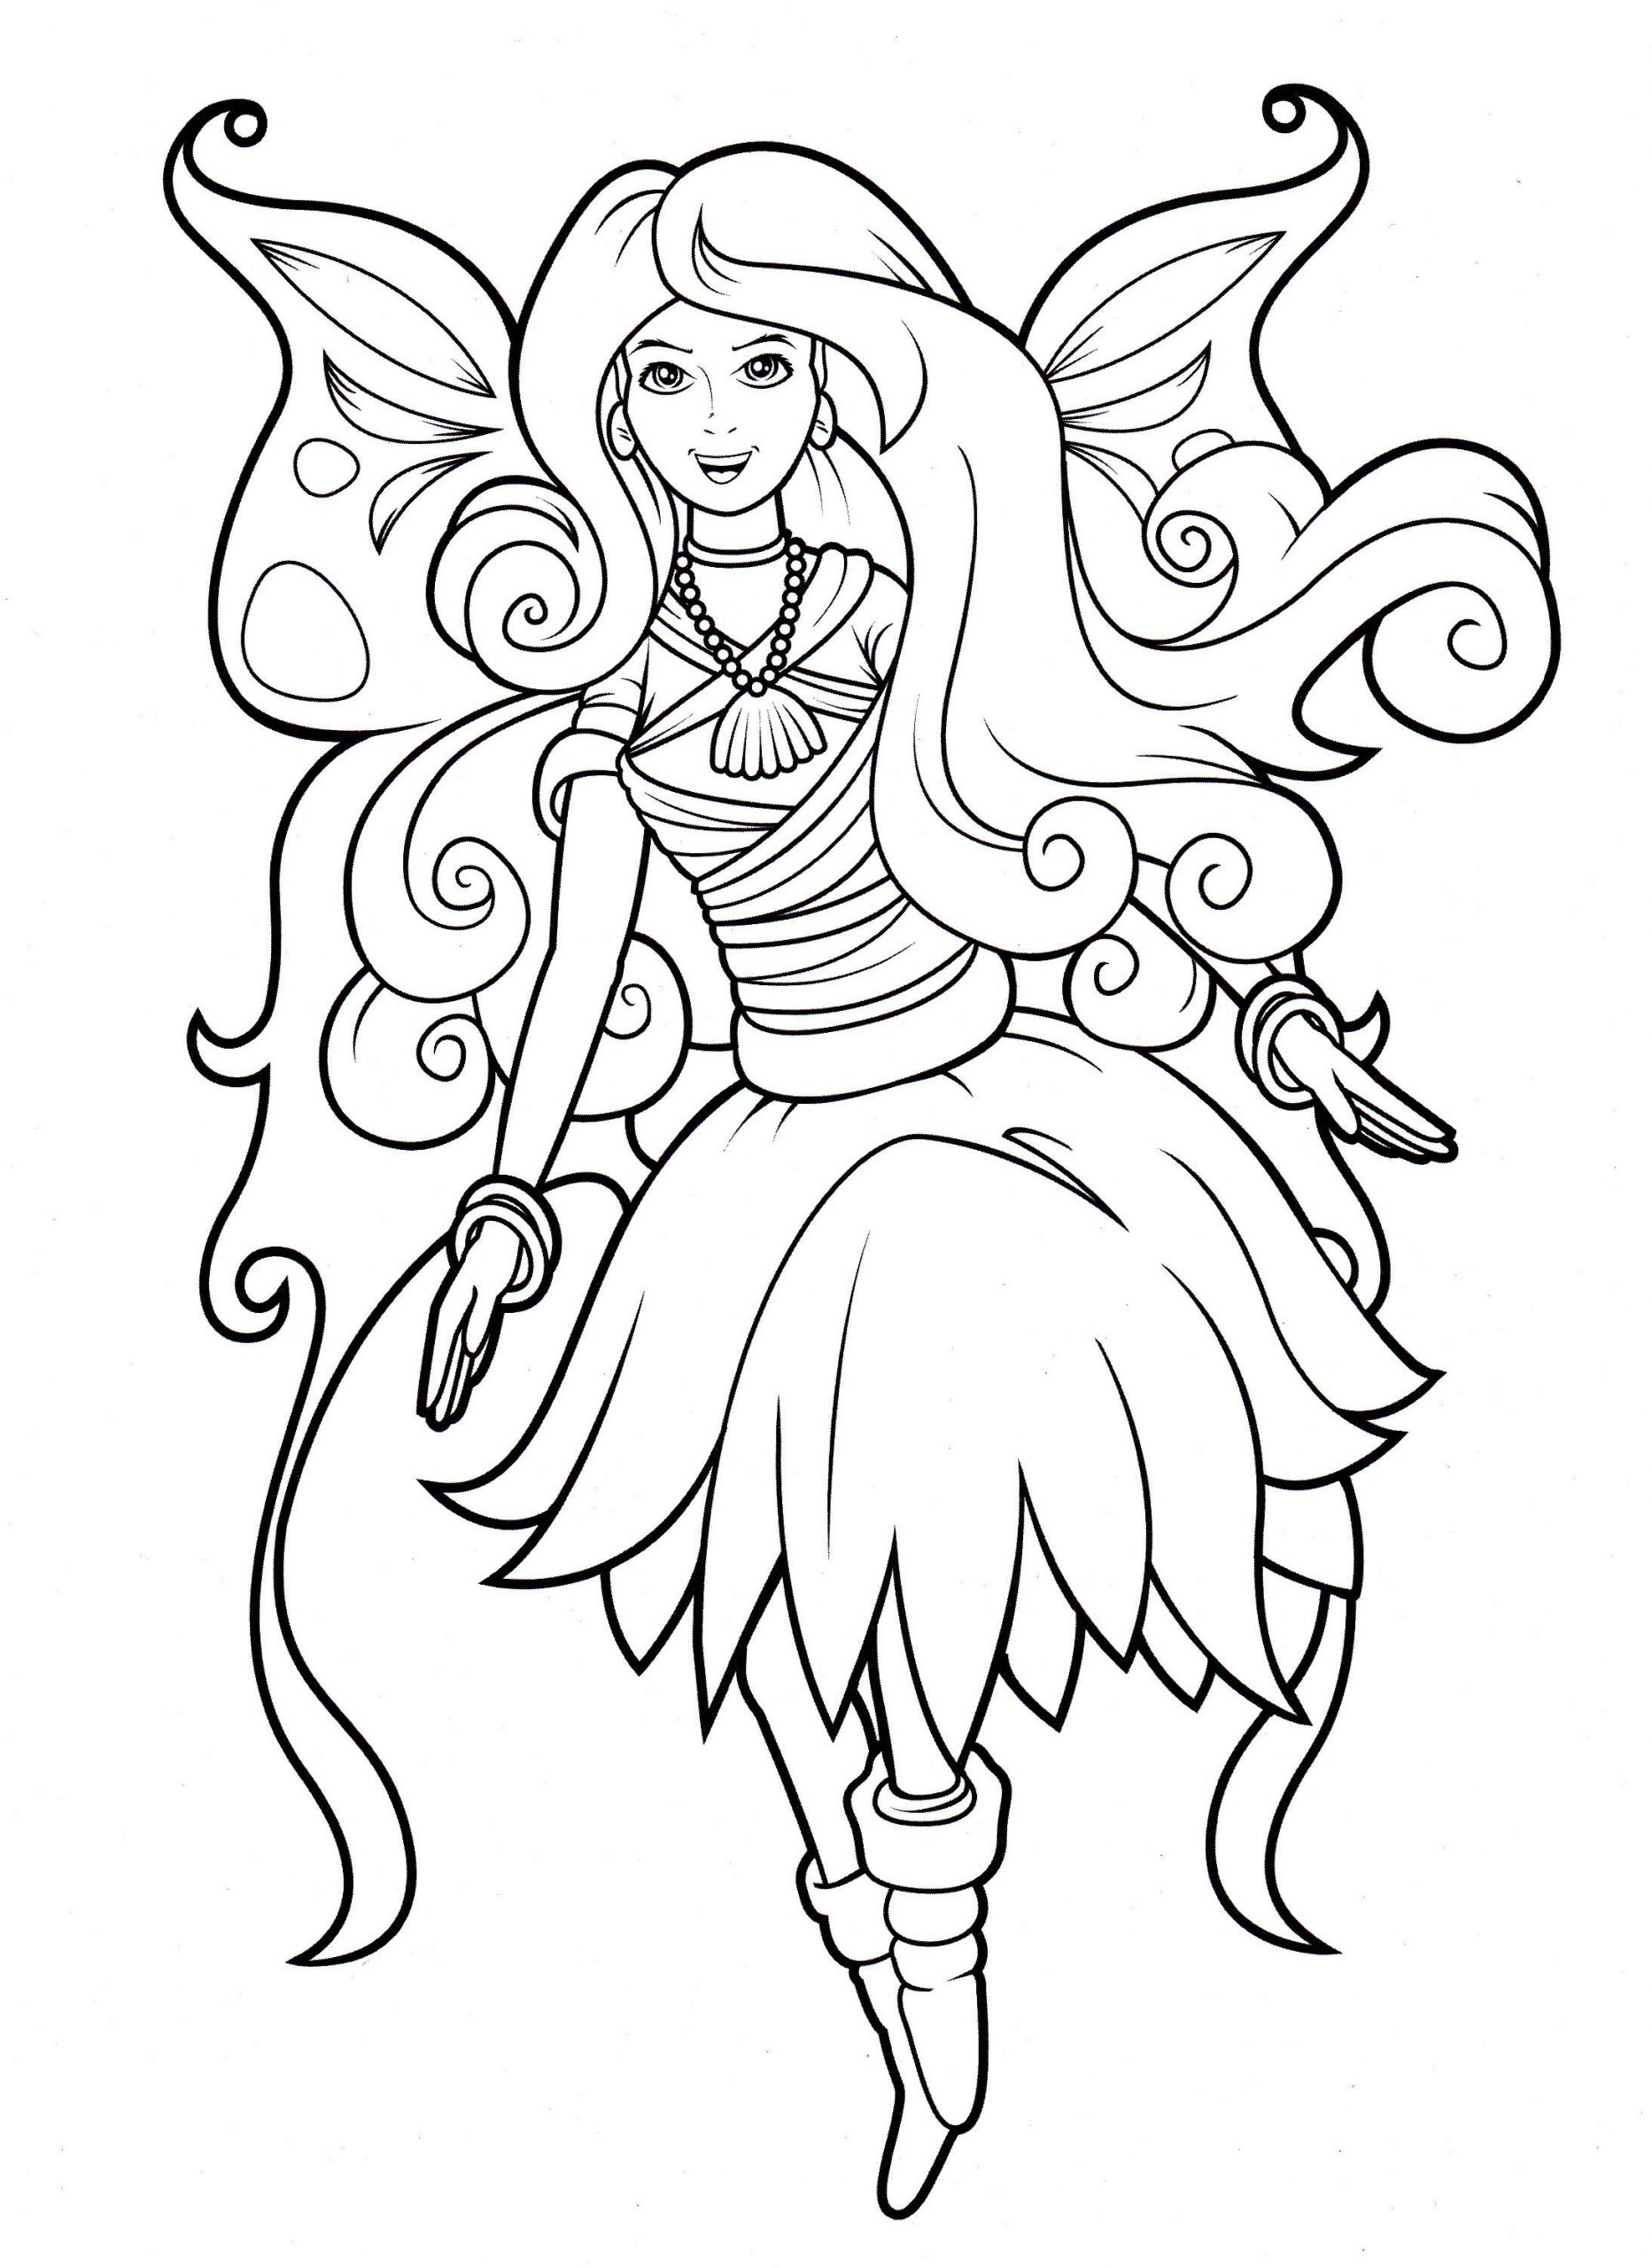 The Best Ideas for Coloring Pages for Girls Fairies - Home, Family ...